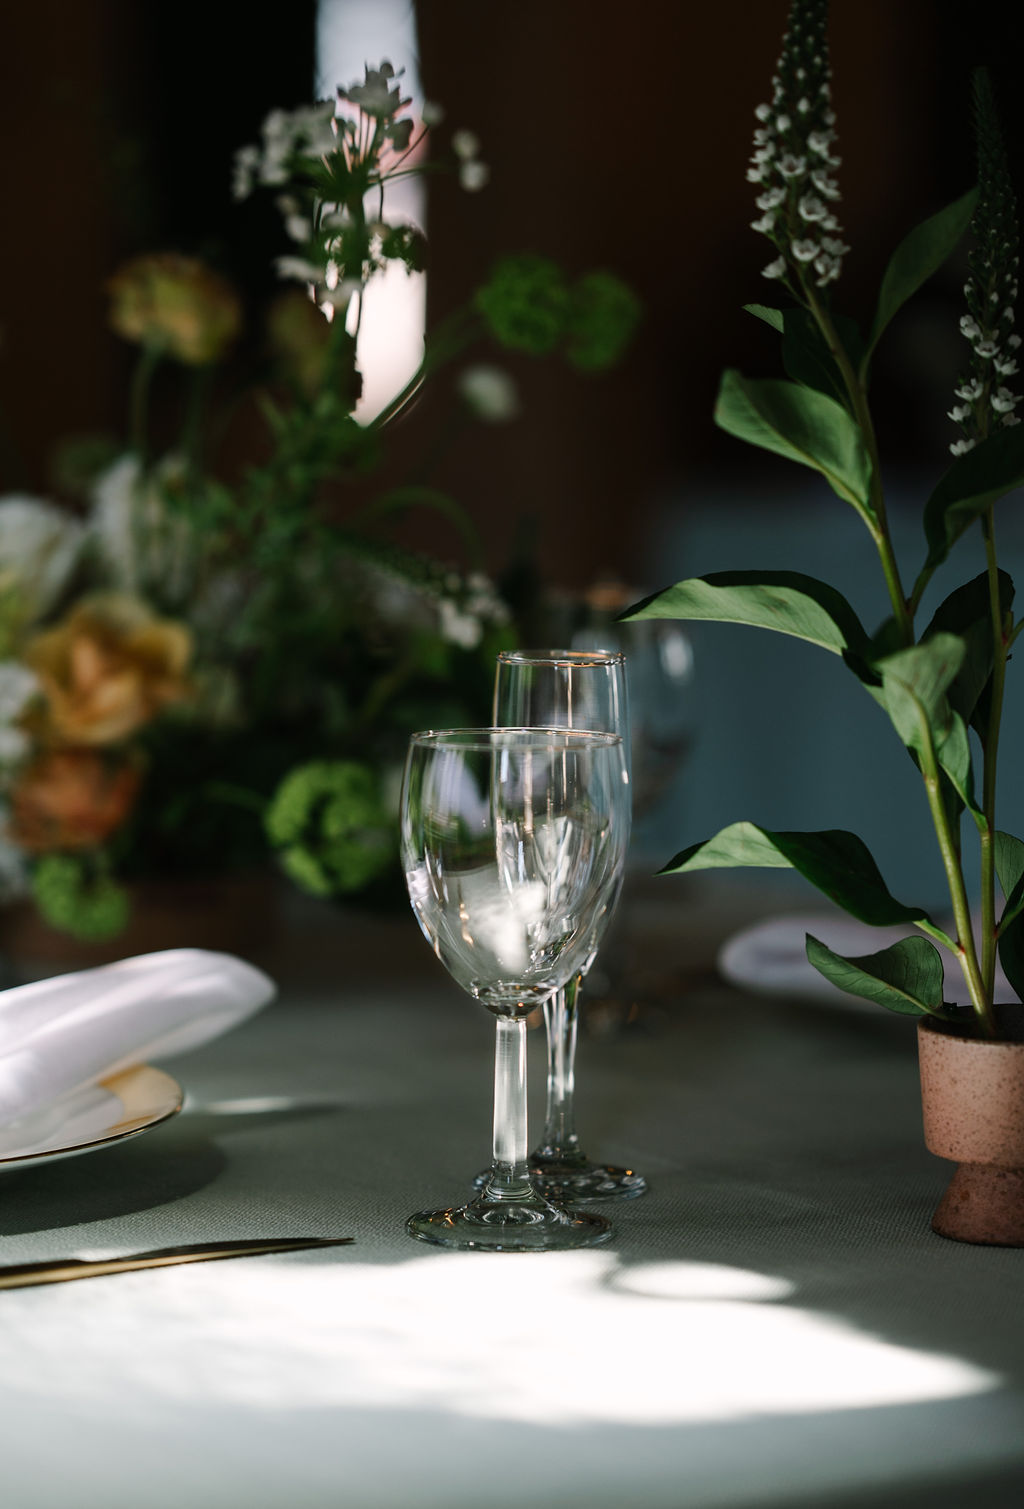 clean simple clear glassware wedding reception table top lush greens and delicate white floral table arrangements clean simple white napkin gold rimmed charger gold brushed flatware clay and terracotta pots